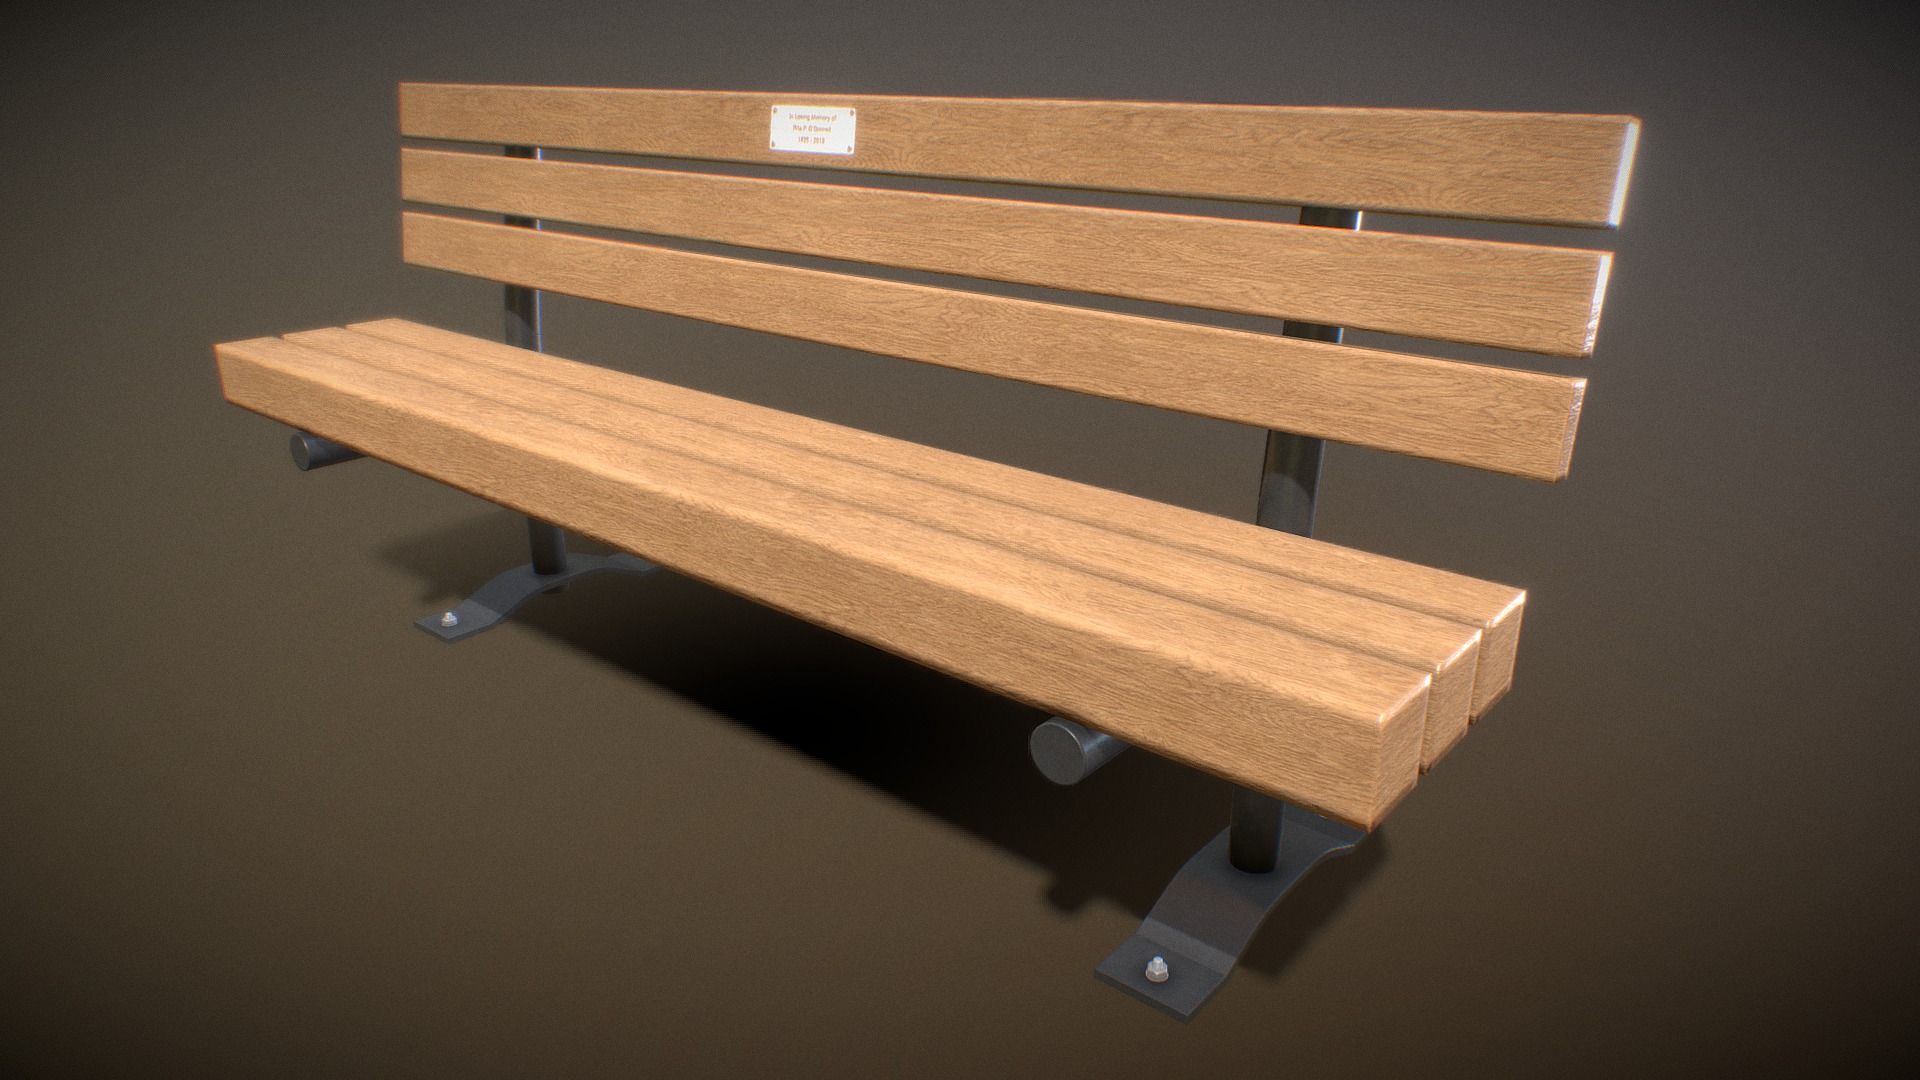 3D model ParkBench - This is a 3D model of the ParkBench. The 3D model is about a wooden table with a white tag.